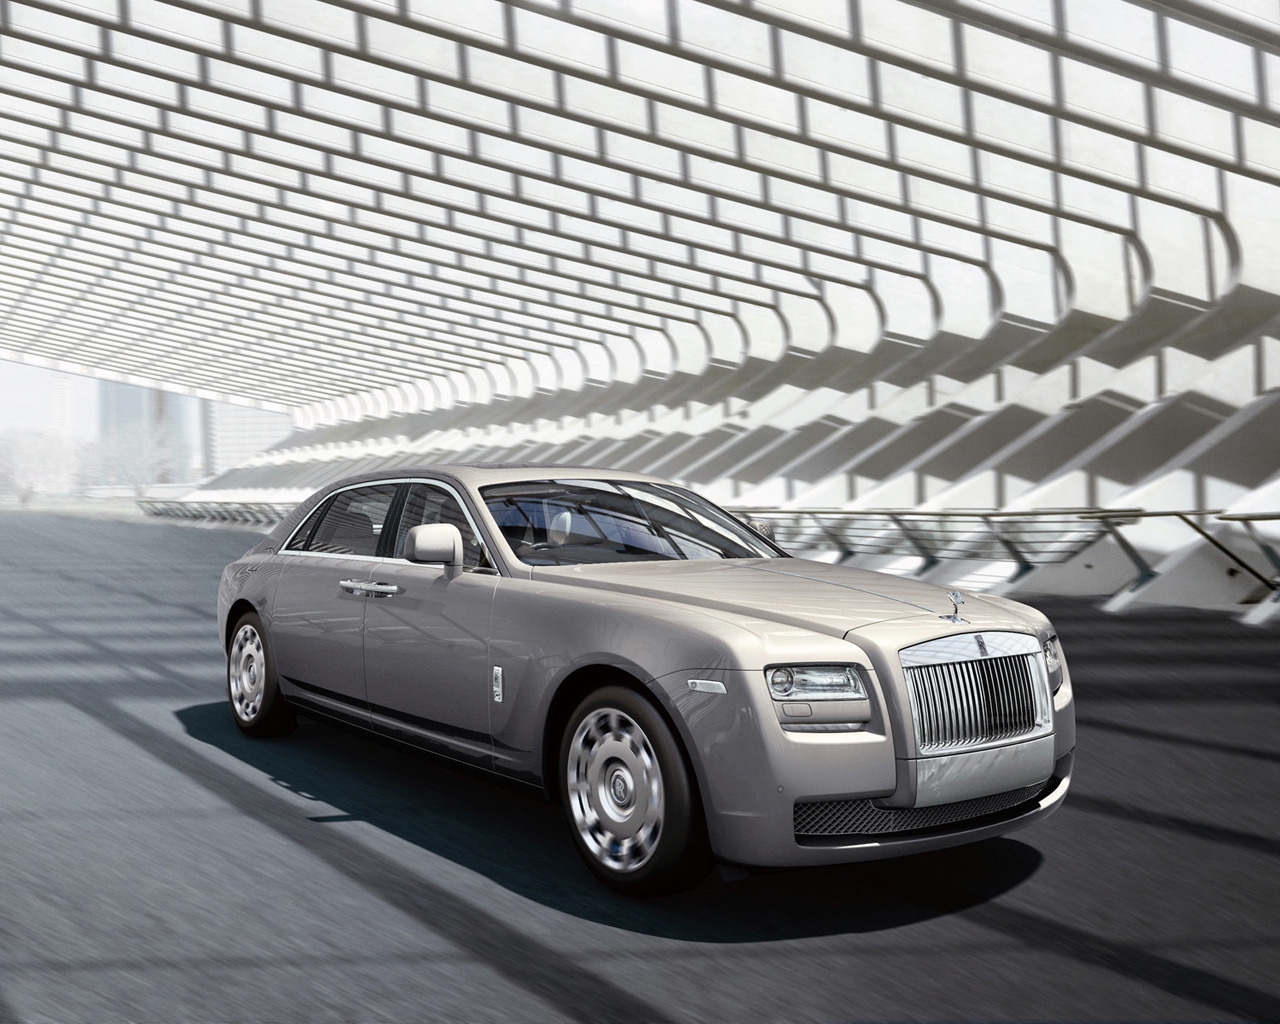 2011 Rolls Royce Ghost for 1280 x 1024 resolution